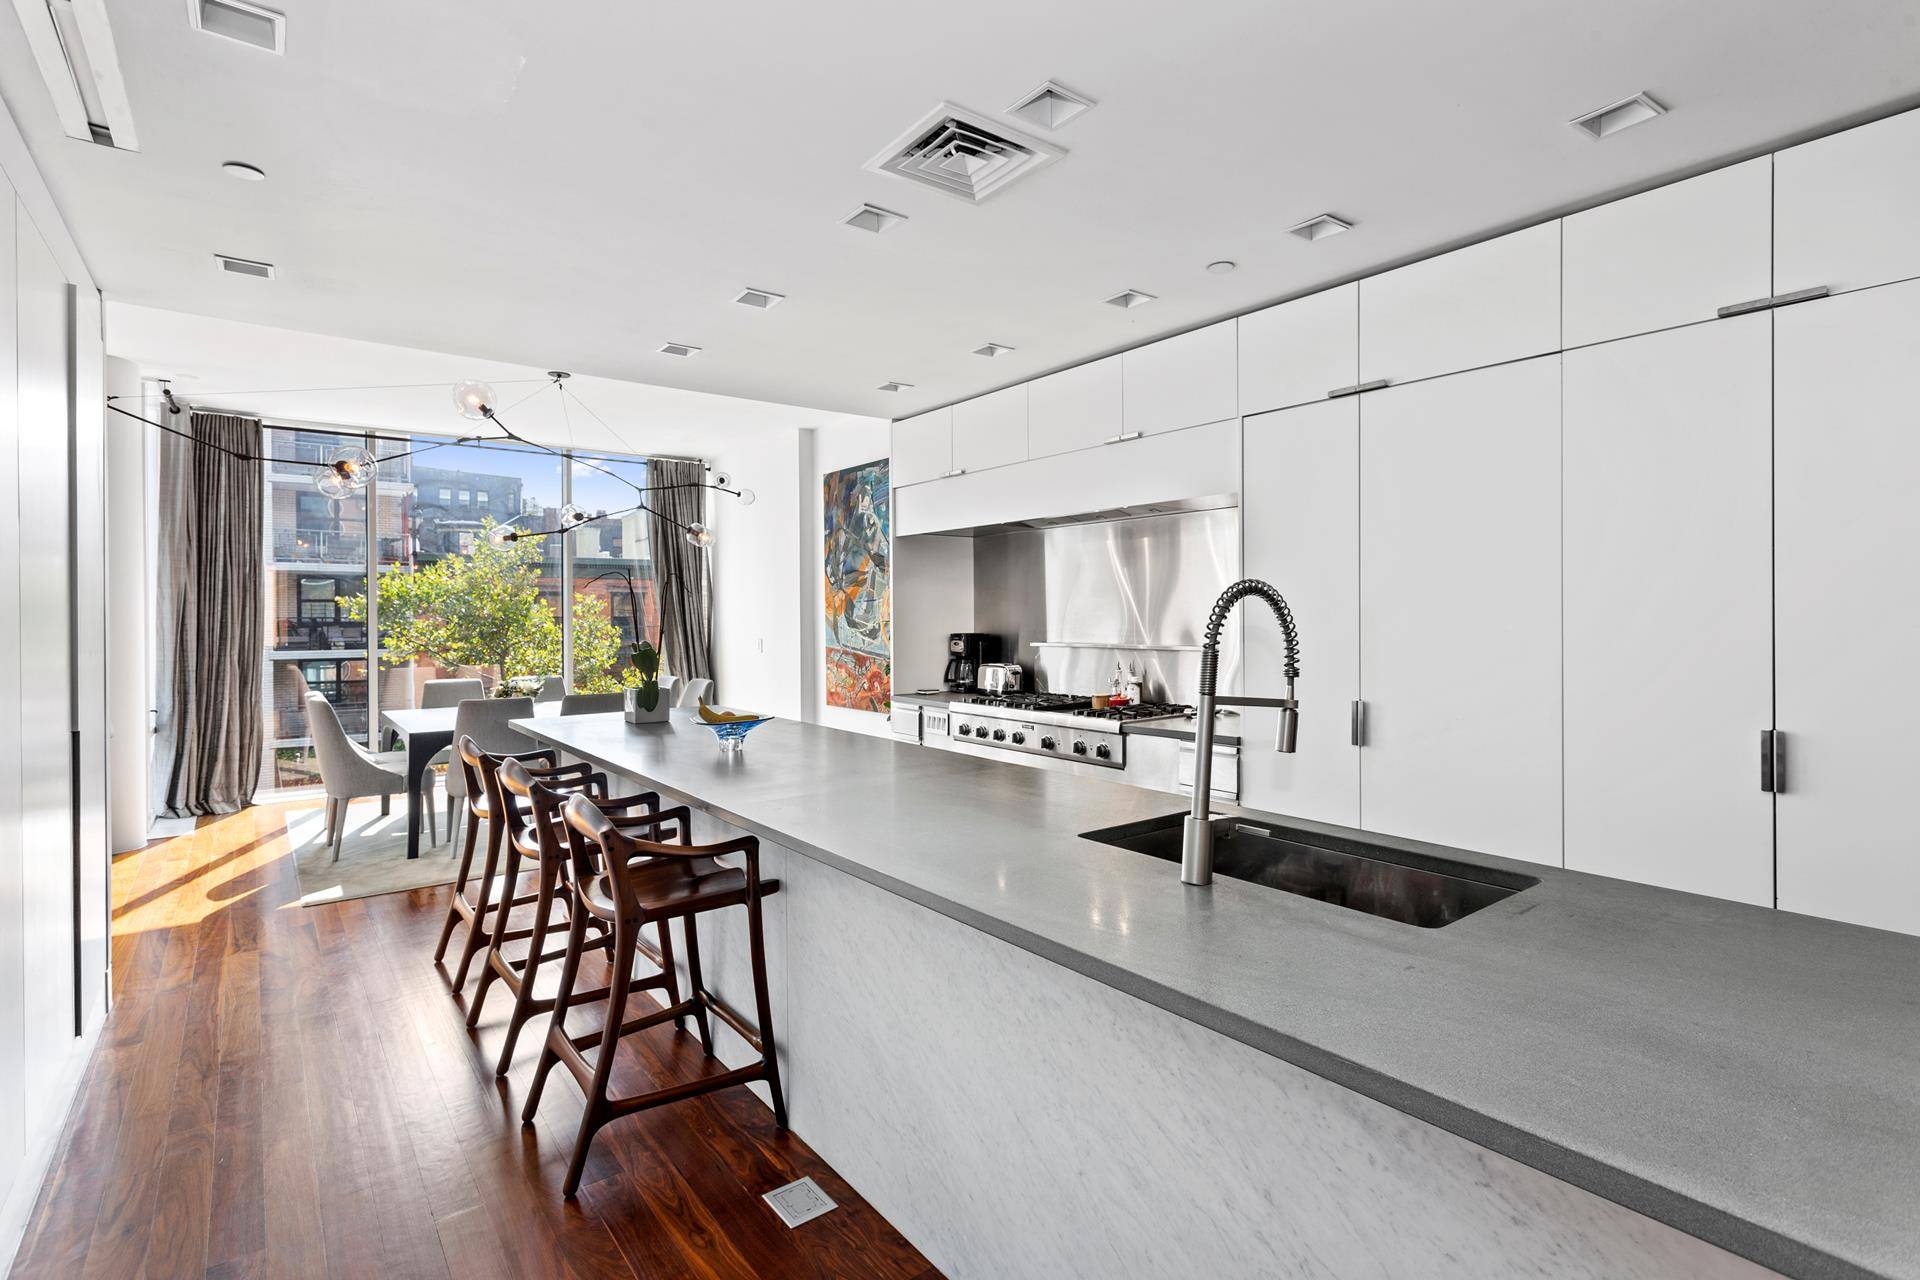 Welcome to 57 Irving Place A A Distinctively Modern, Chic, and Sleek Boutique Condominium in Sought After Gramercy Park.